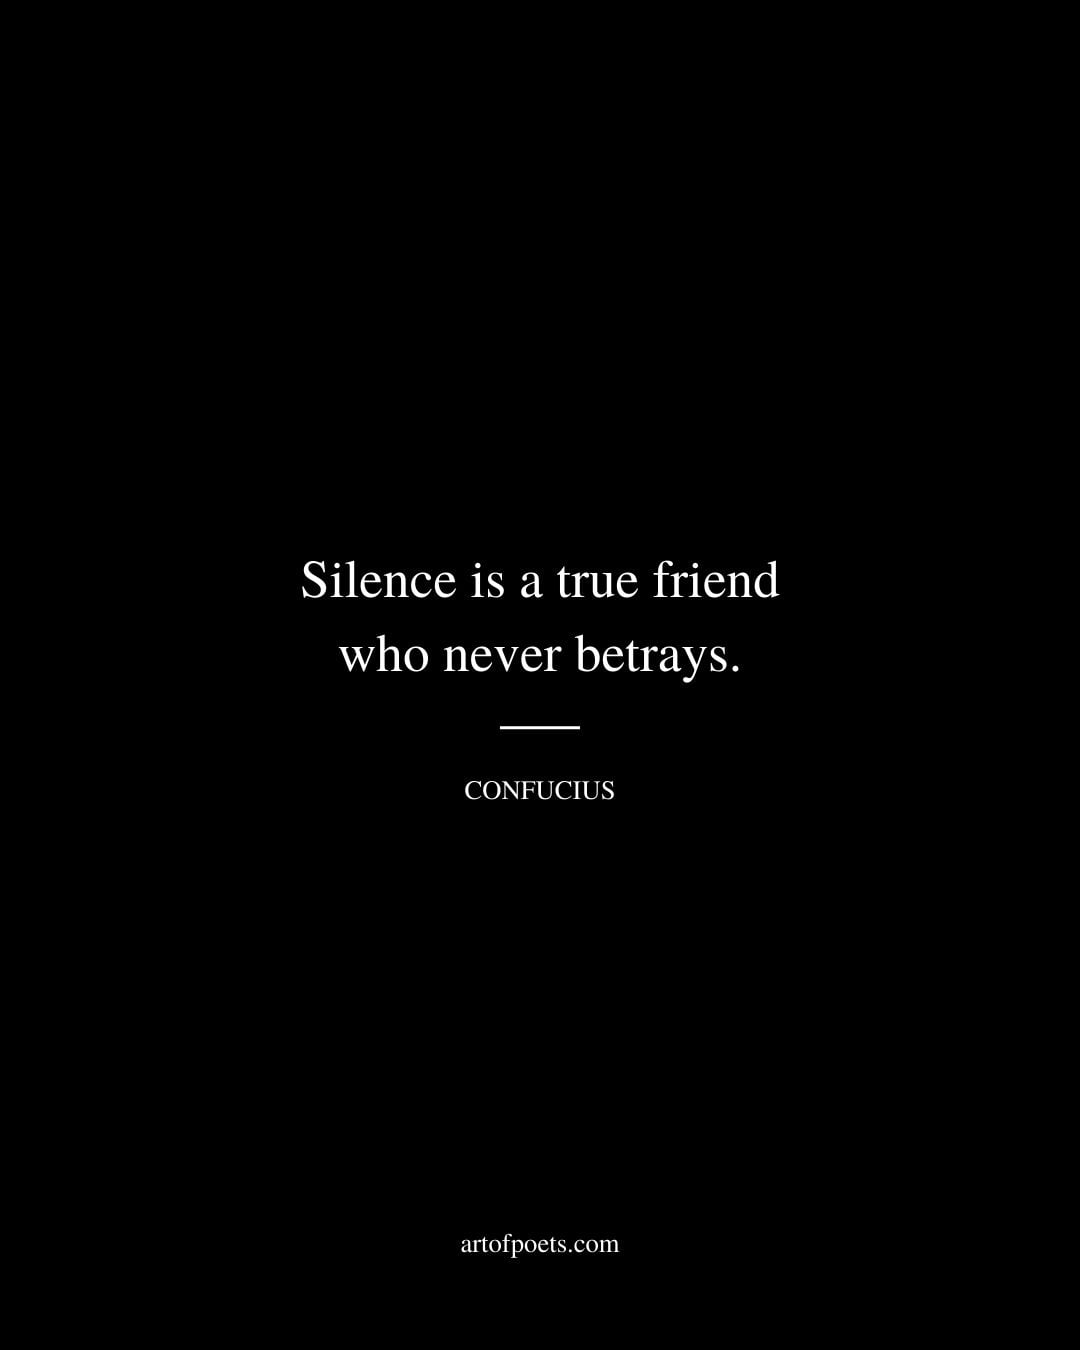 Silence is a true friend who never betrays